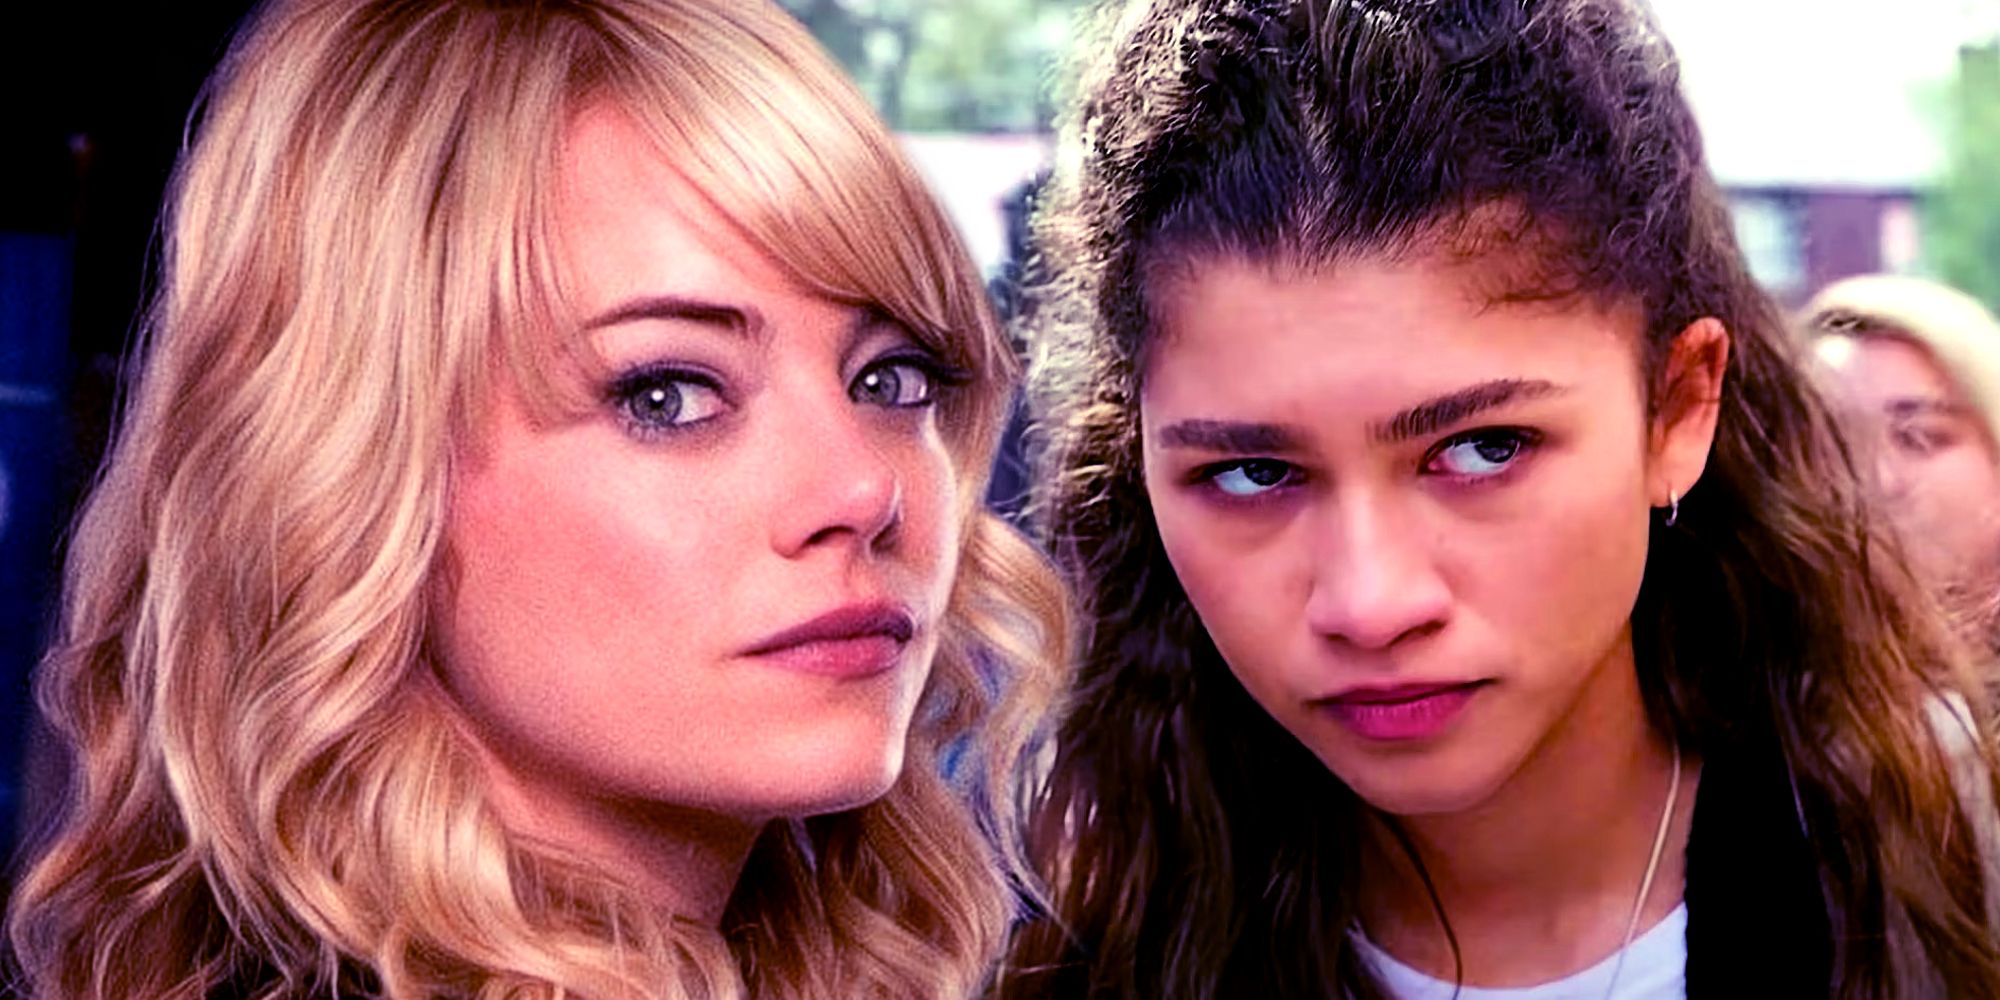 Emma Stone as Gwen Stacy and Zendaya as MJ in the Spider-Man Movies